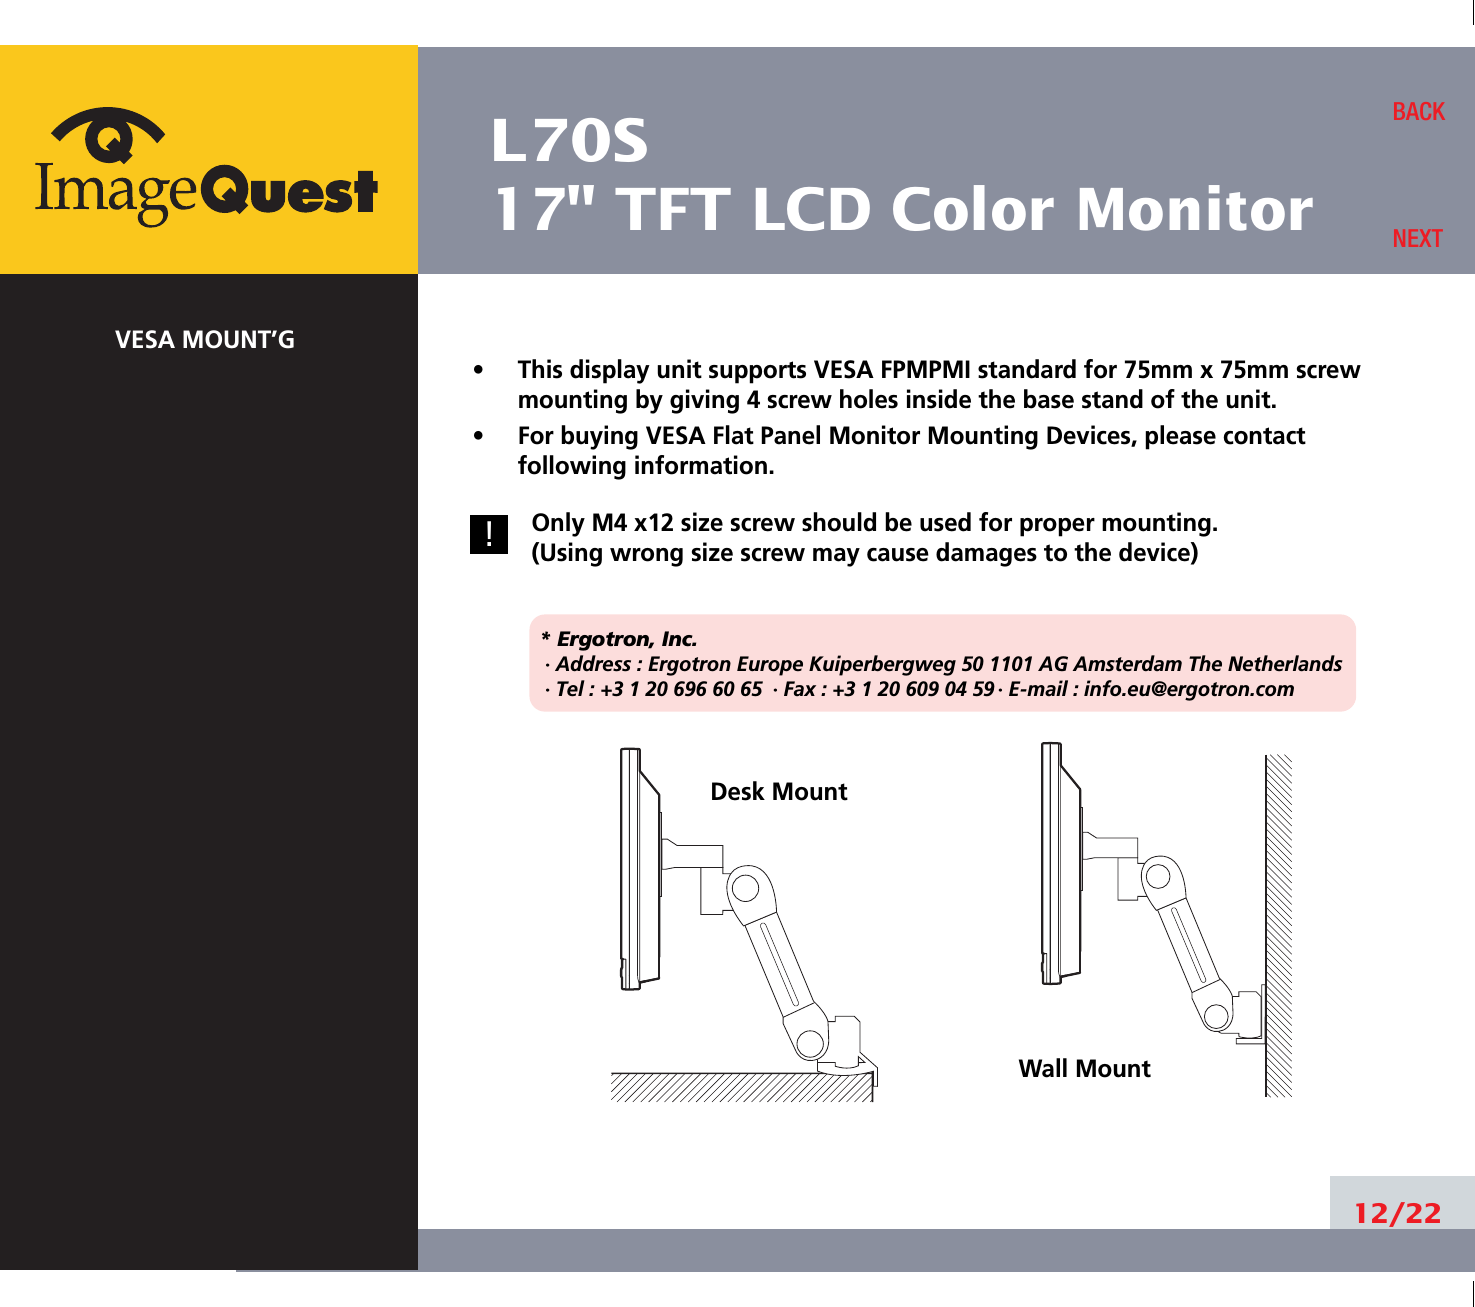 L70S17&quot; TFT LCD Color MonitorVESA MOUNT’G•     This display unit supports VESA FPMPMI standard for 75mm x 75mm screwmounting by giving 4 screw holes inside the base stand of the unit.•     For buying VESA Flat Panel Monitor Mounting Devices, please contactfollowing information.Only M4 x12 size screw should be used for proper mounting.(Using wrong size screw may cause damages to the device)* Ergotron, Inc.· Address : Ergotron Europe Kuiperbergweg 50 1101 AG Amsterdam The Netherlands· Tel : +3 1 20 696 60 65 · Fax : +3 1 20 609 04 59 · E-mail : info.eu@ergotron.com12/22BACKNEXTDesk MountWall Mount!